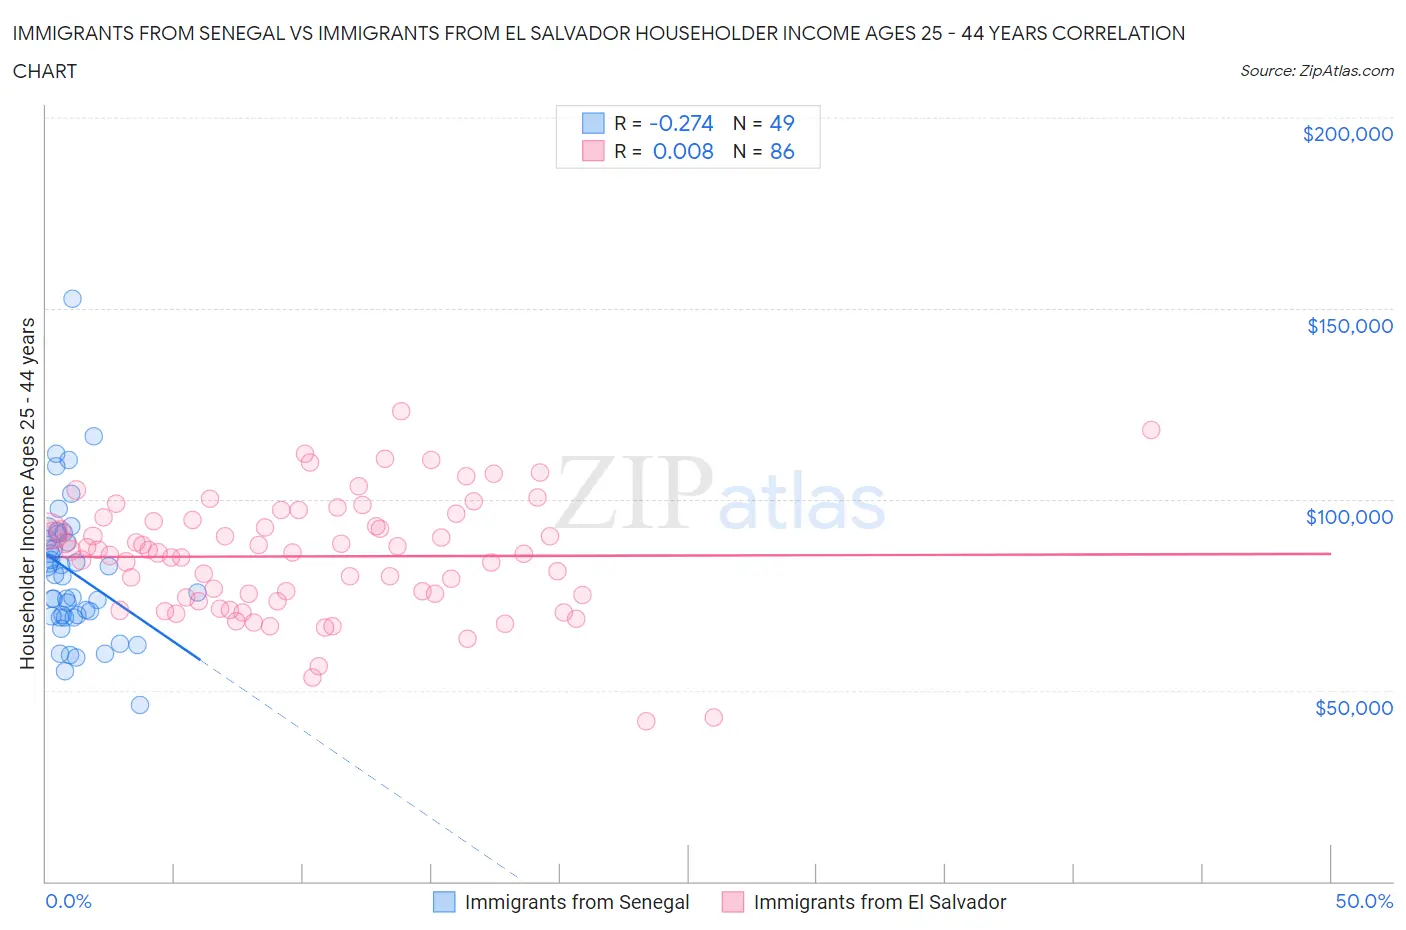 Immigrants from Senegal vs Immigrants from El Salvador Householder Income Ages 25 - 44 years